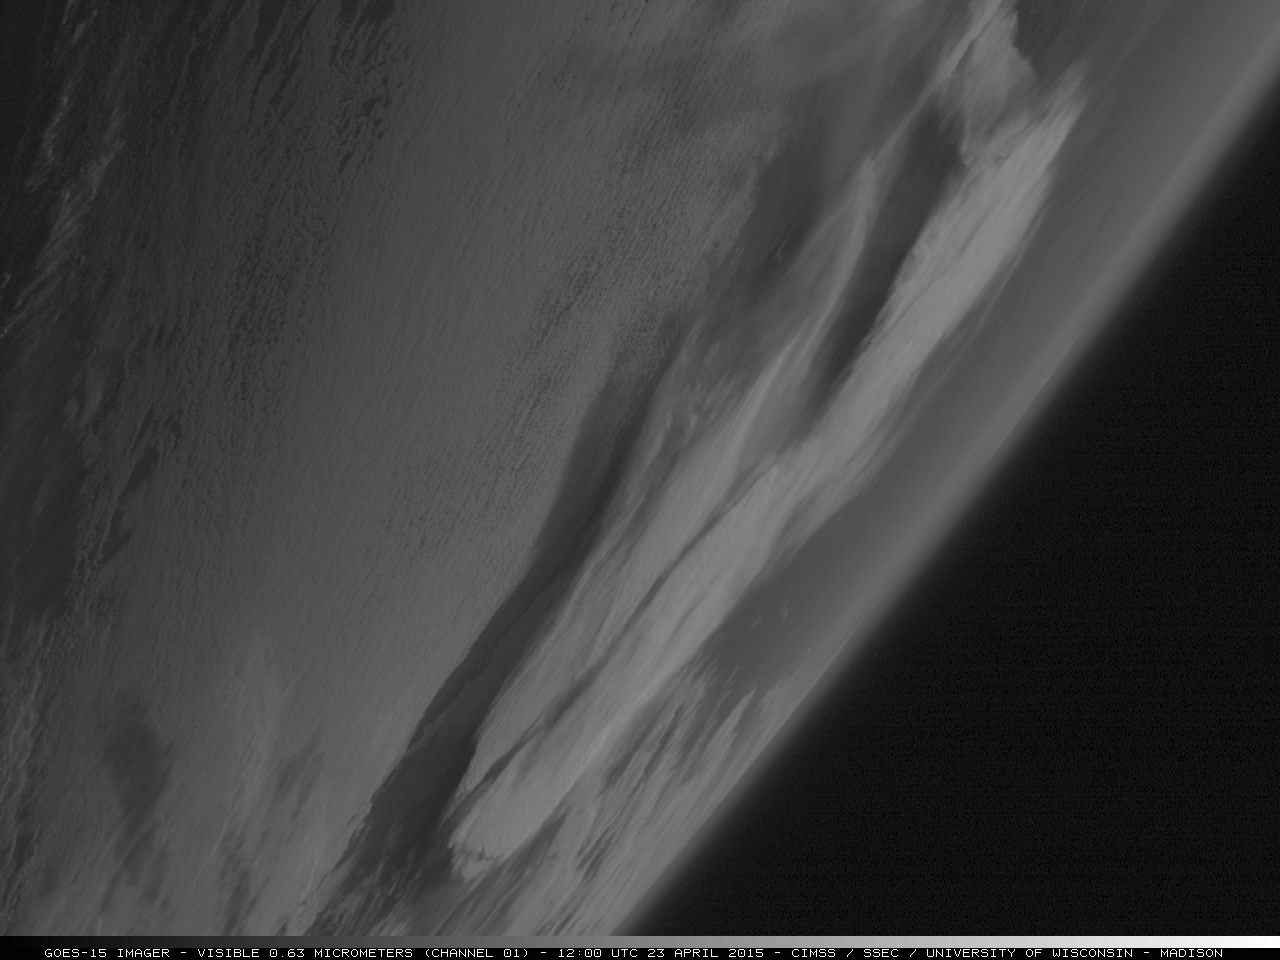 GOES-15 (GOES-West) 0.63 µm visible image